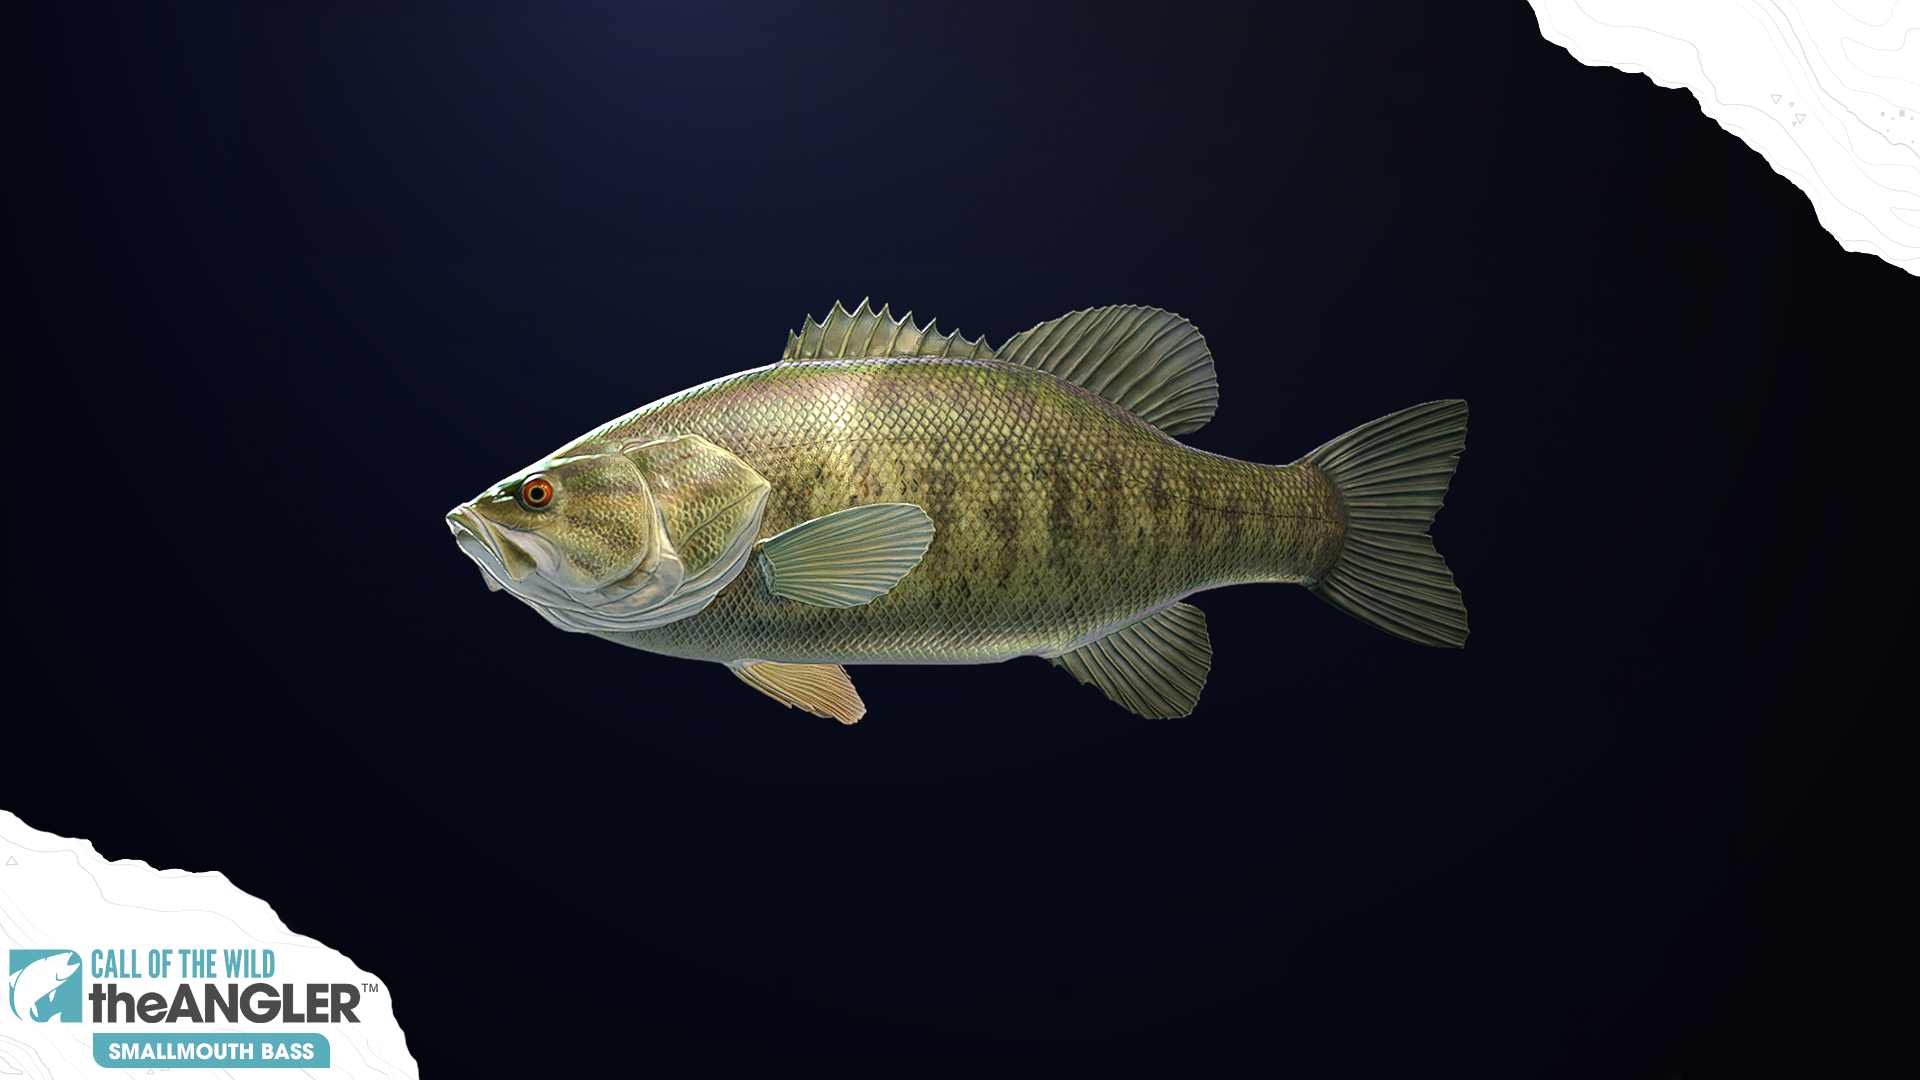 An image of the fish species, Smallmouth Bass.